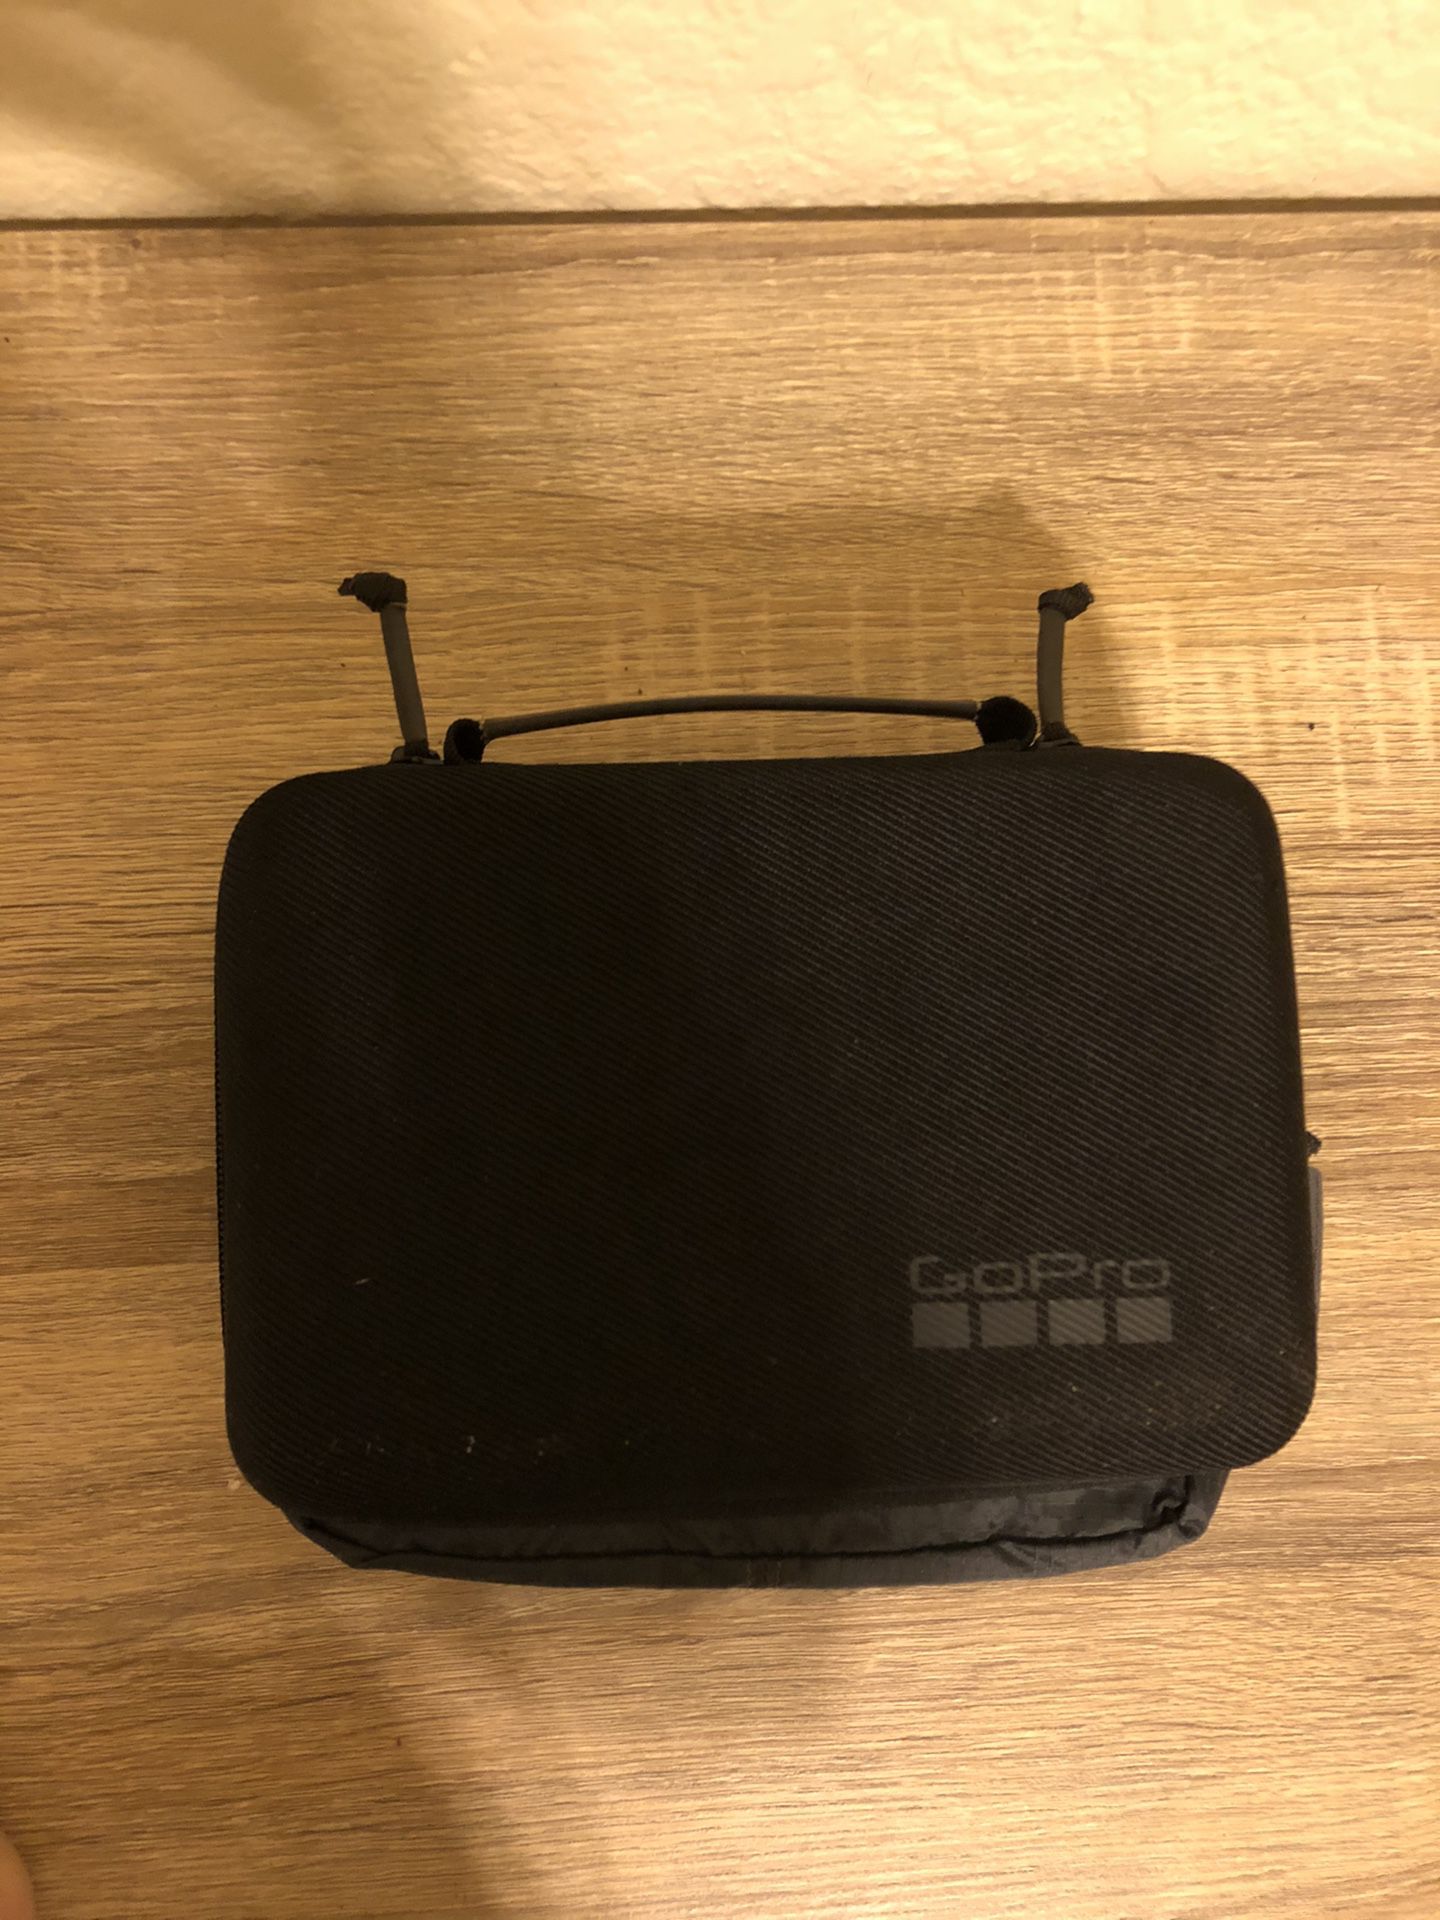 GoPro case and pouch